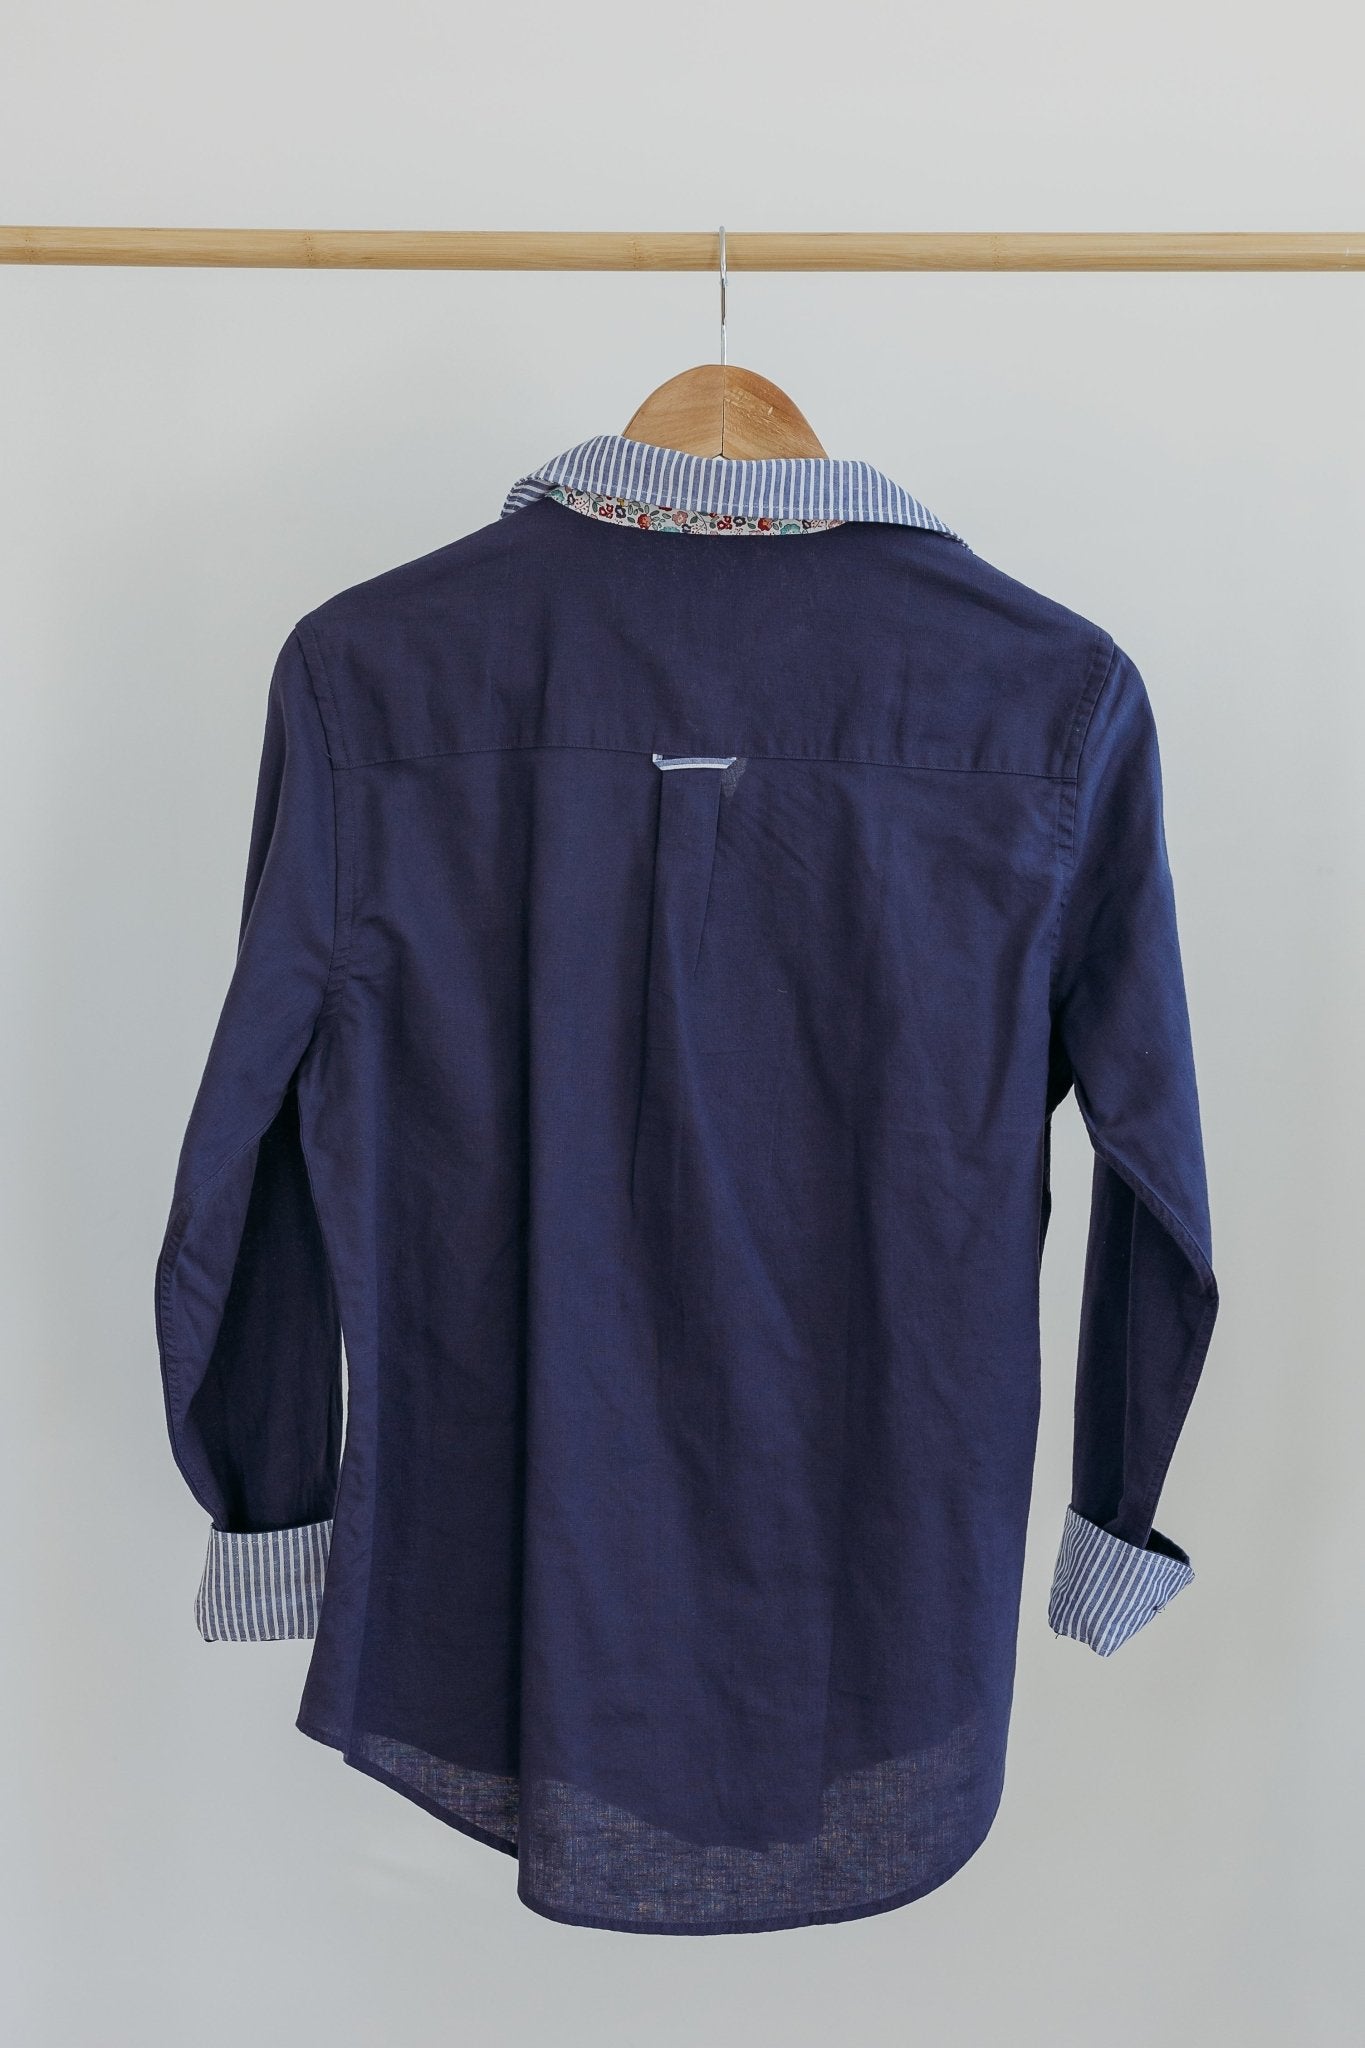 Navy Linen/Cotton Blend Shirt - Size 8 only - Hide and Seek Clothing